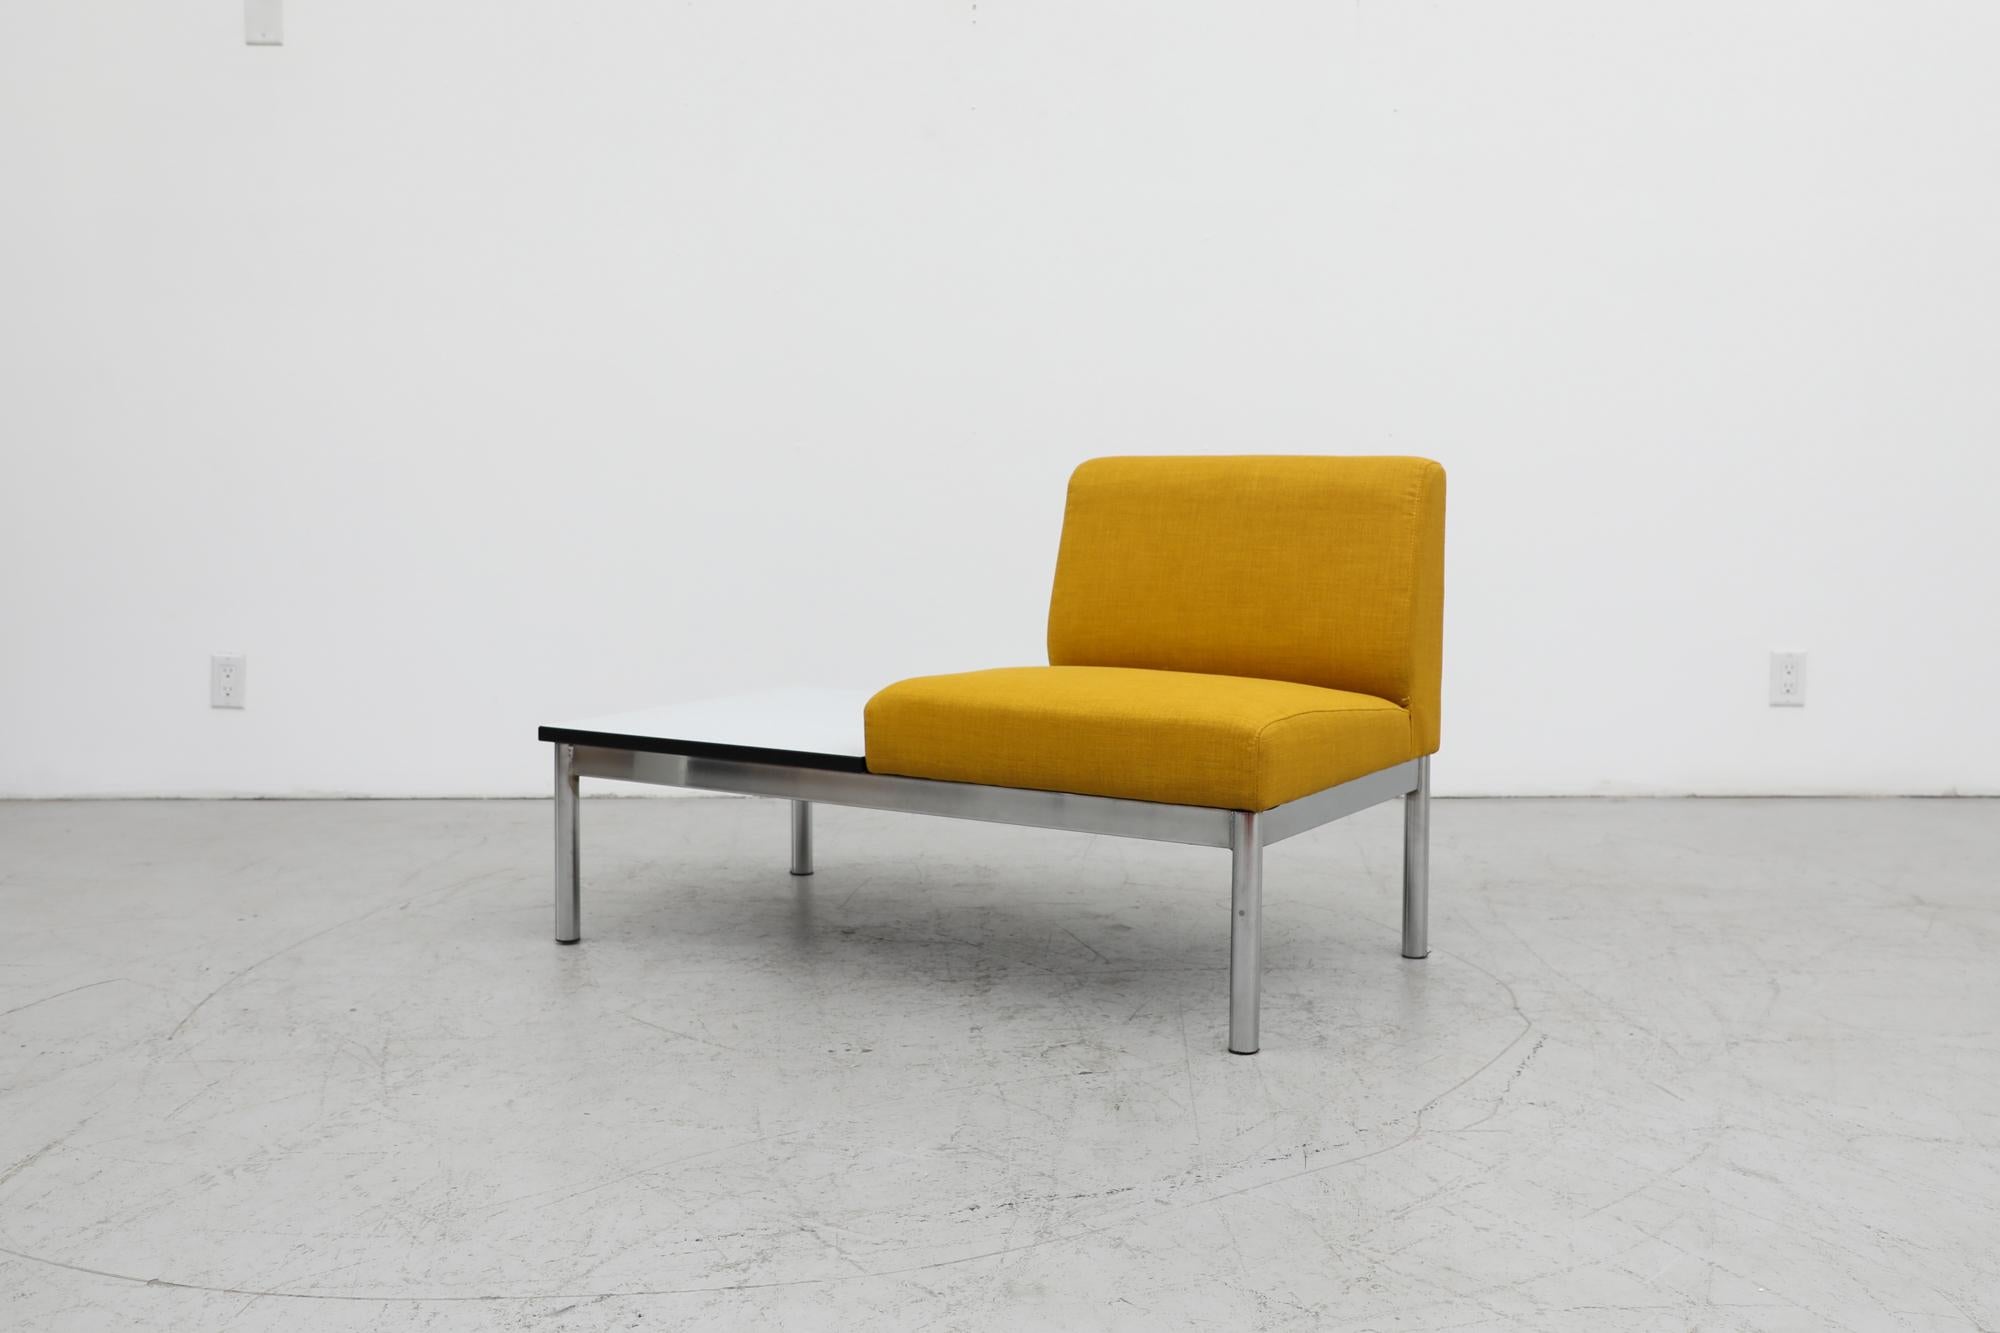 Dutch Mid-Century Kho Liang Ie Style Yellow Chair with Chrome Legs and Connected Table For Sale